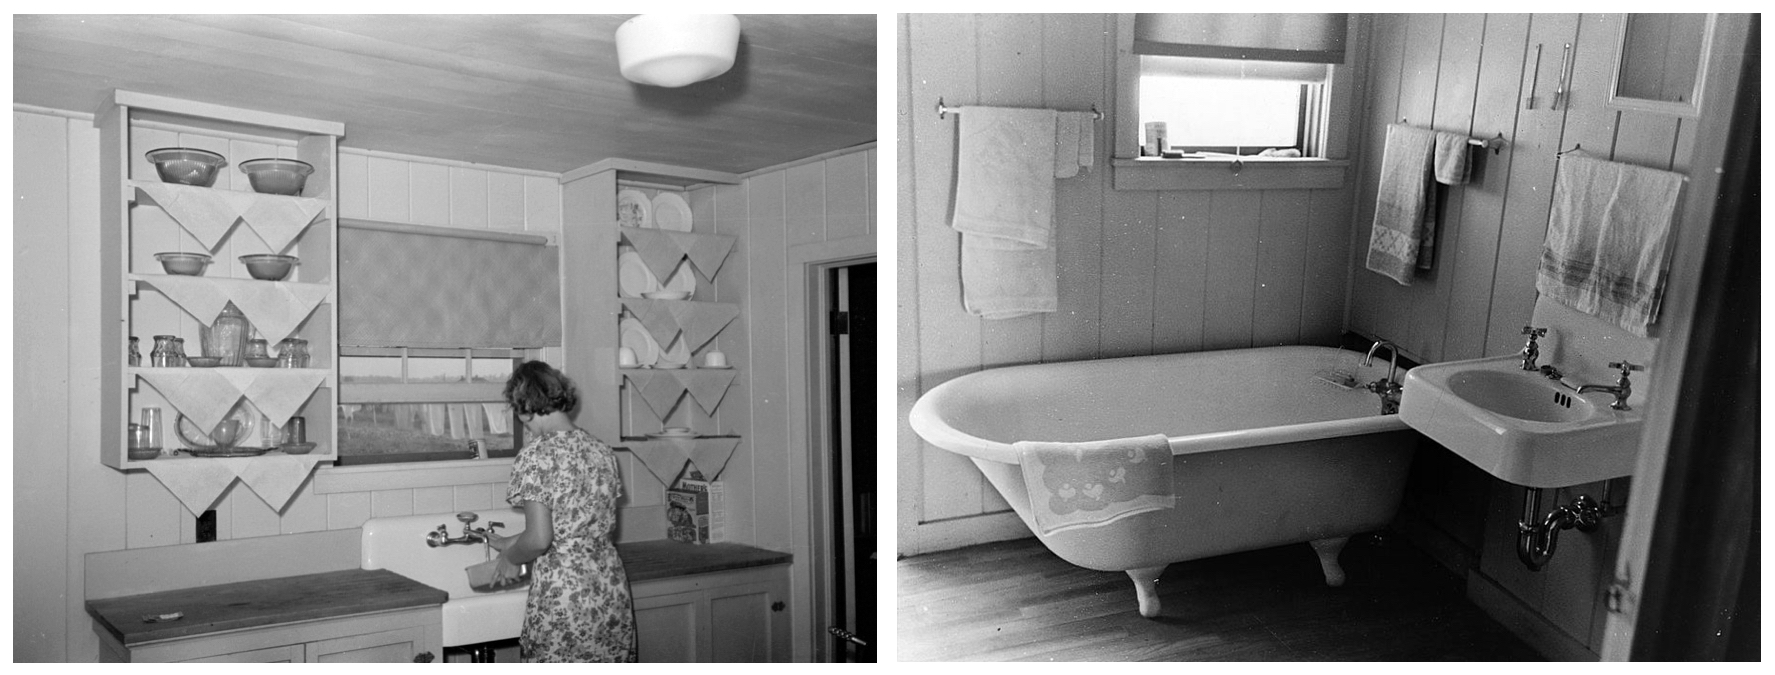  Left: Kitchen in farm home, Lake Dick Project, 1938. Russell Lee.  Right: Bathroom in farmer's home, Lake Dick Project, 1938. Russell Lee. 